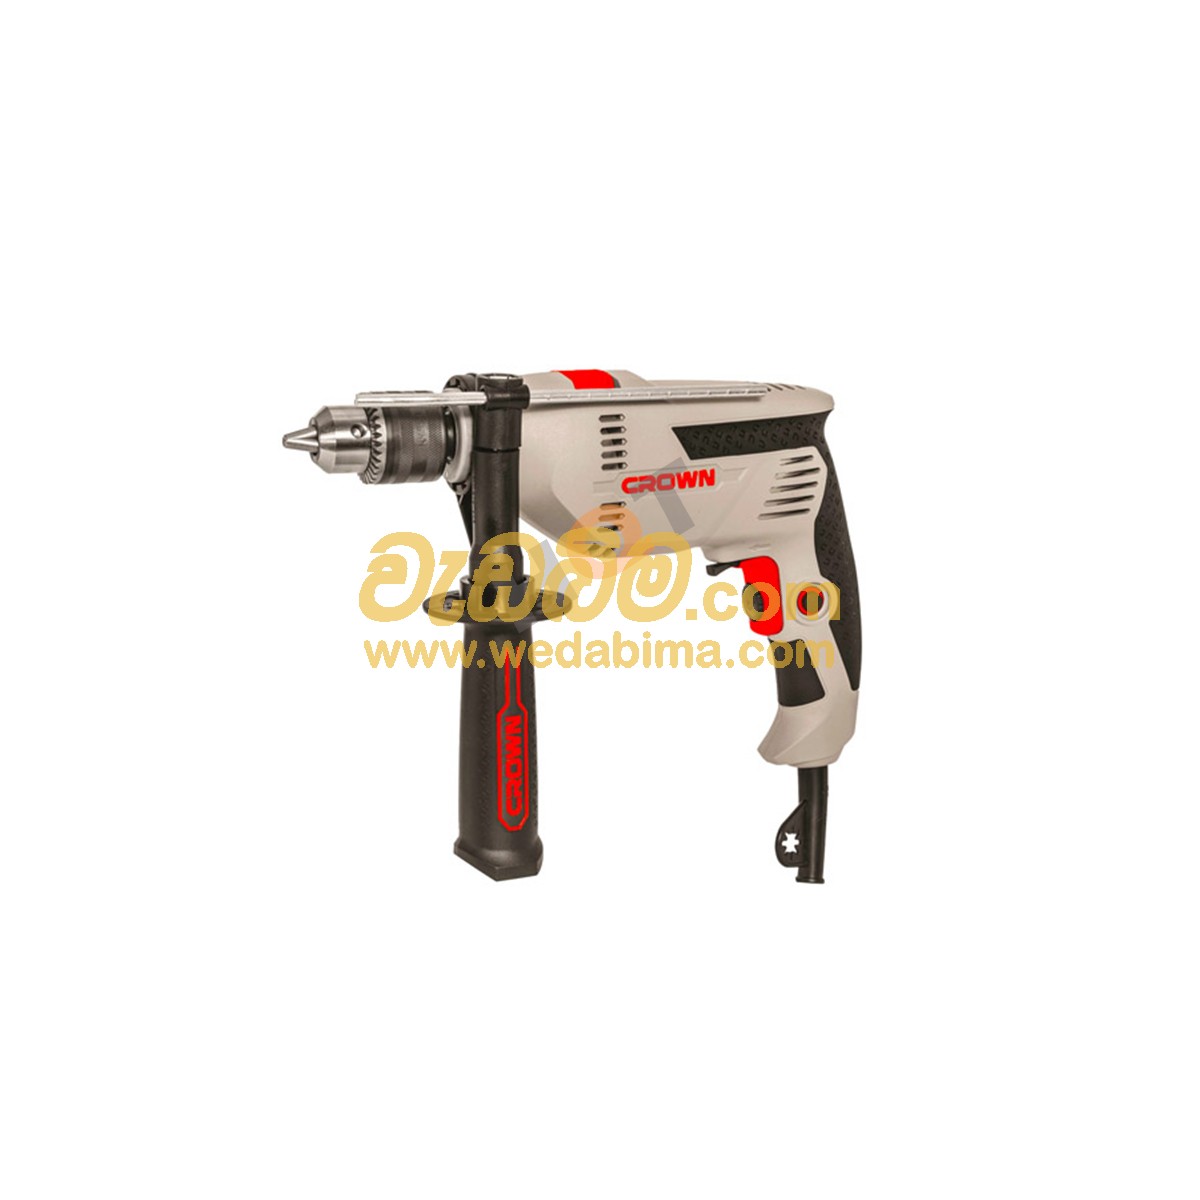 Cover image for CROWN Impact Drill 600W 13MM